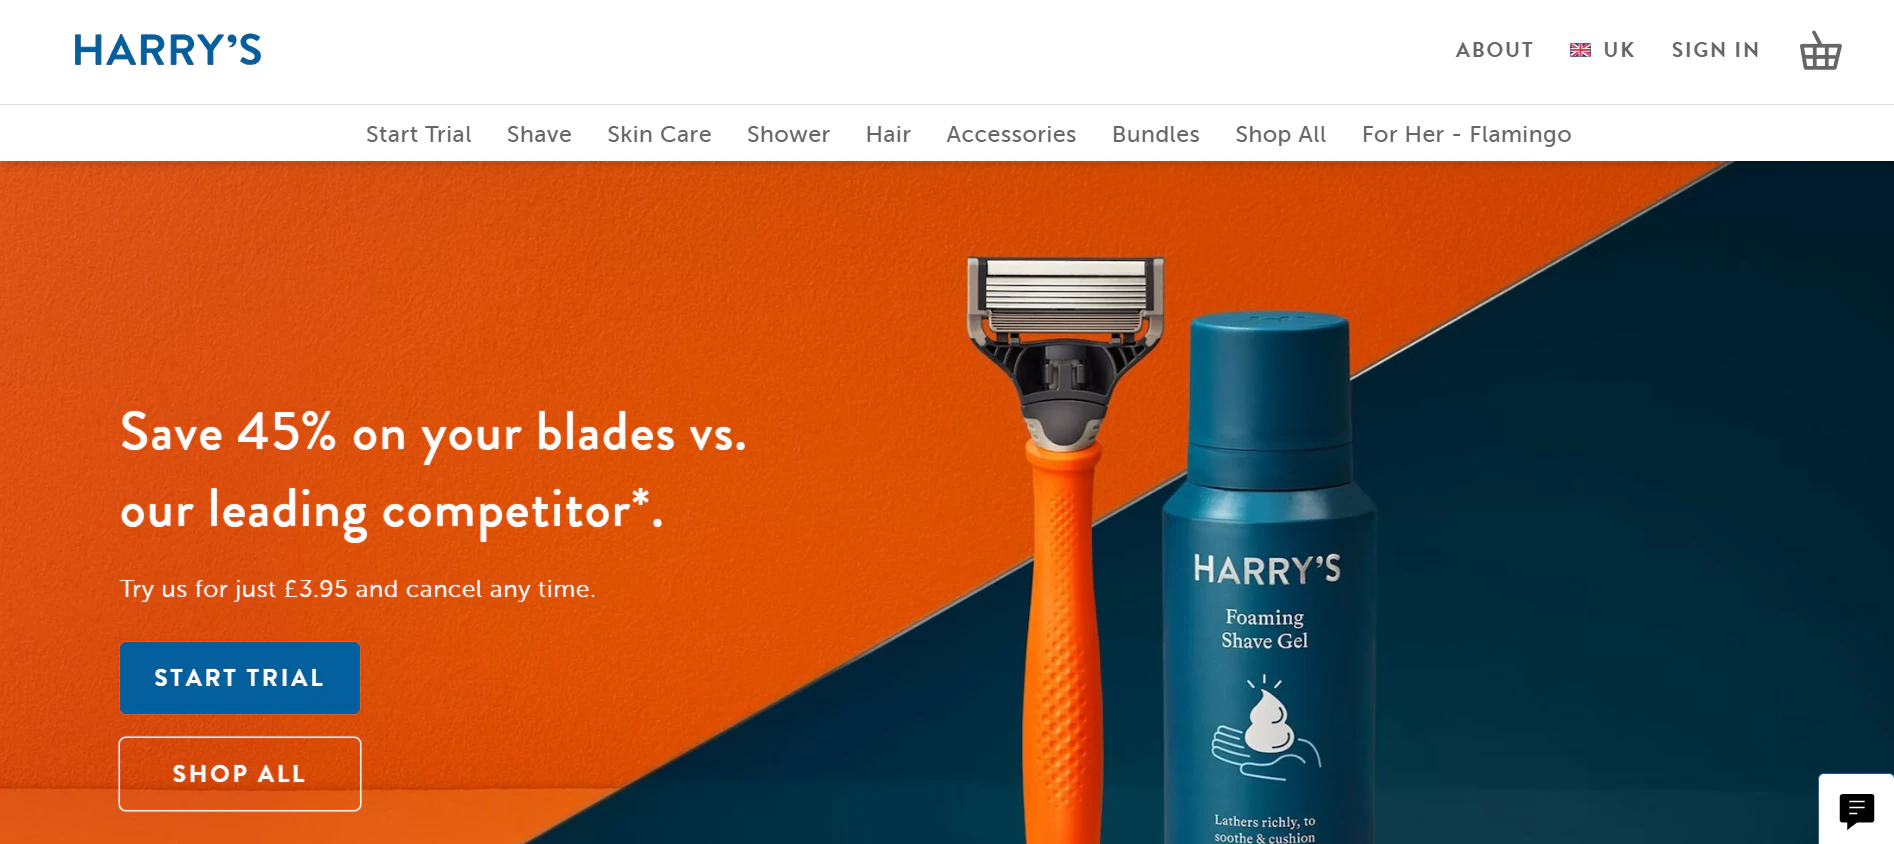 harry's shopify eCommerce store